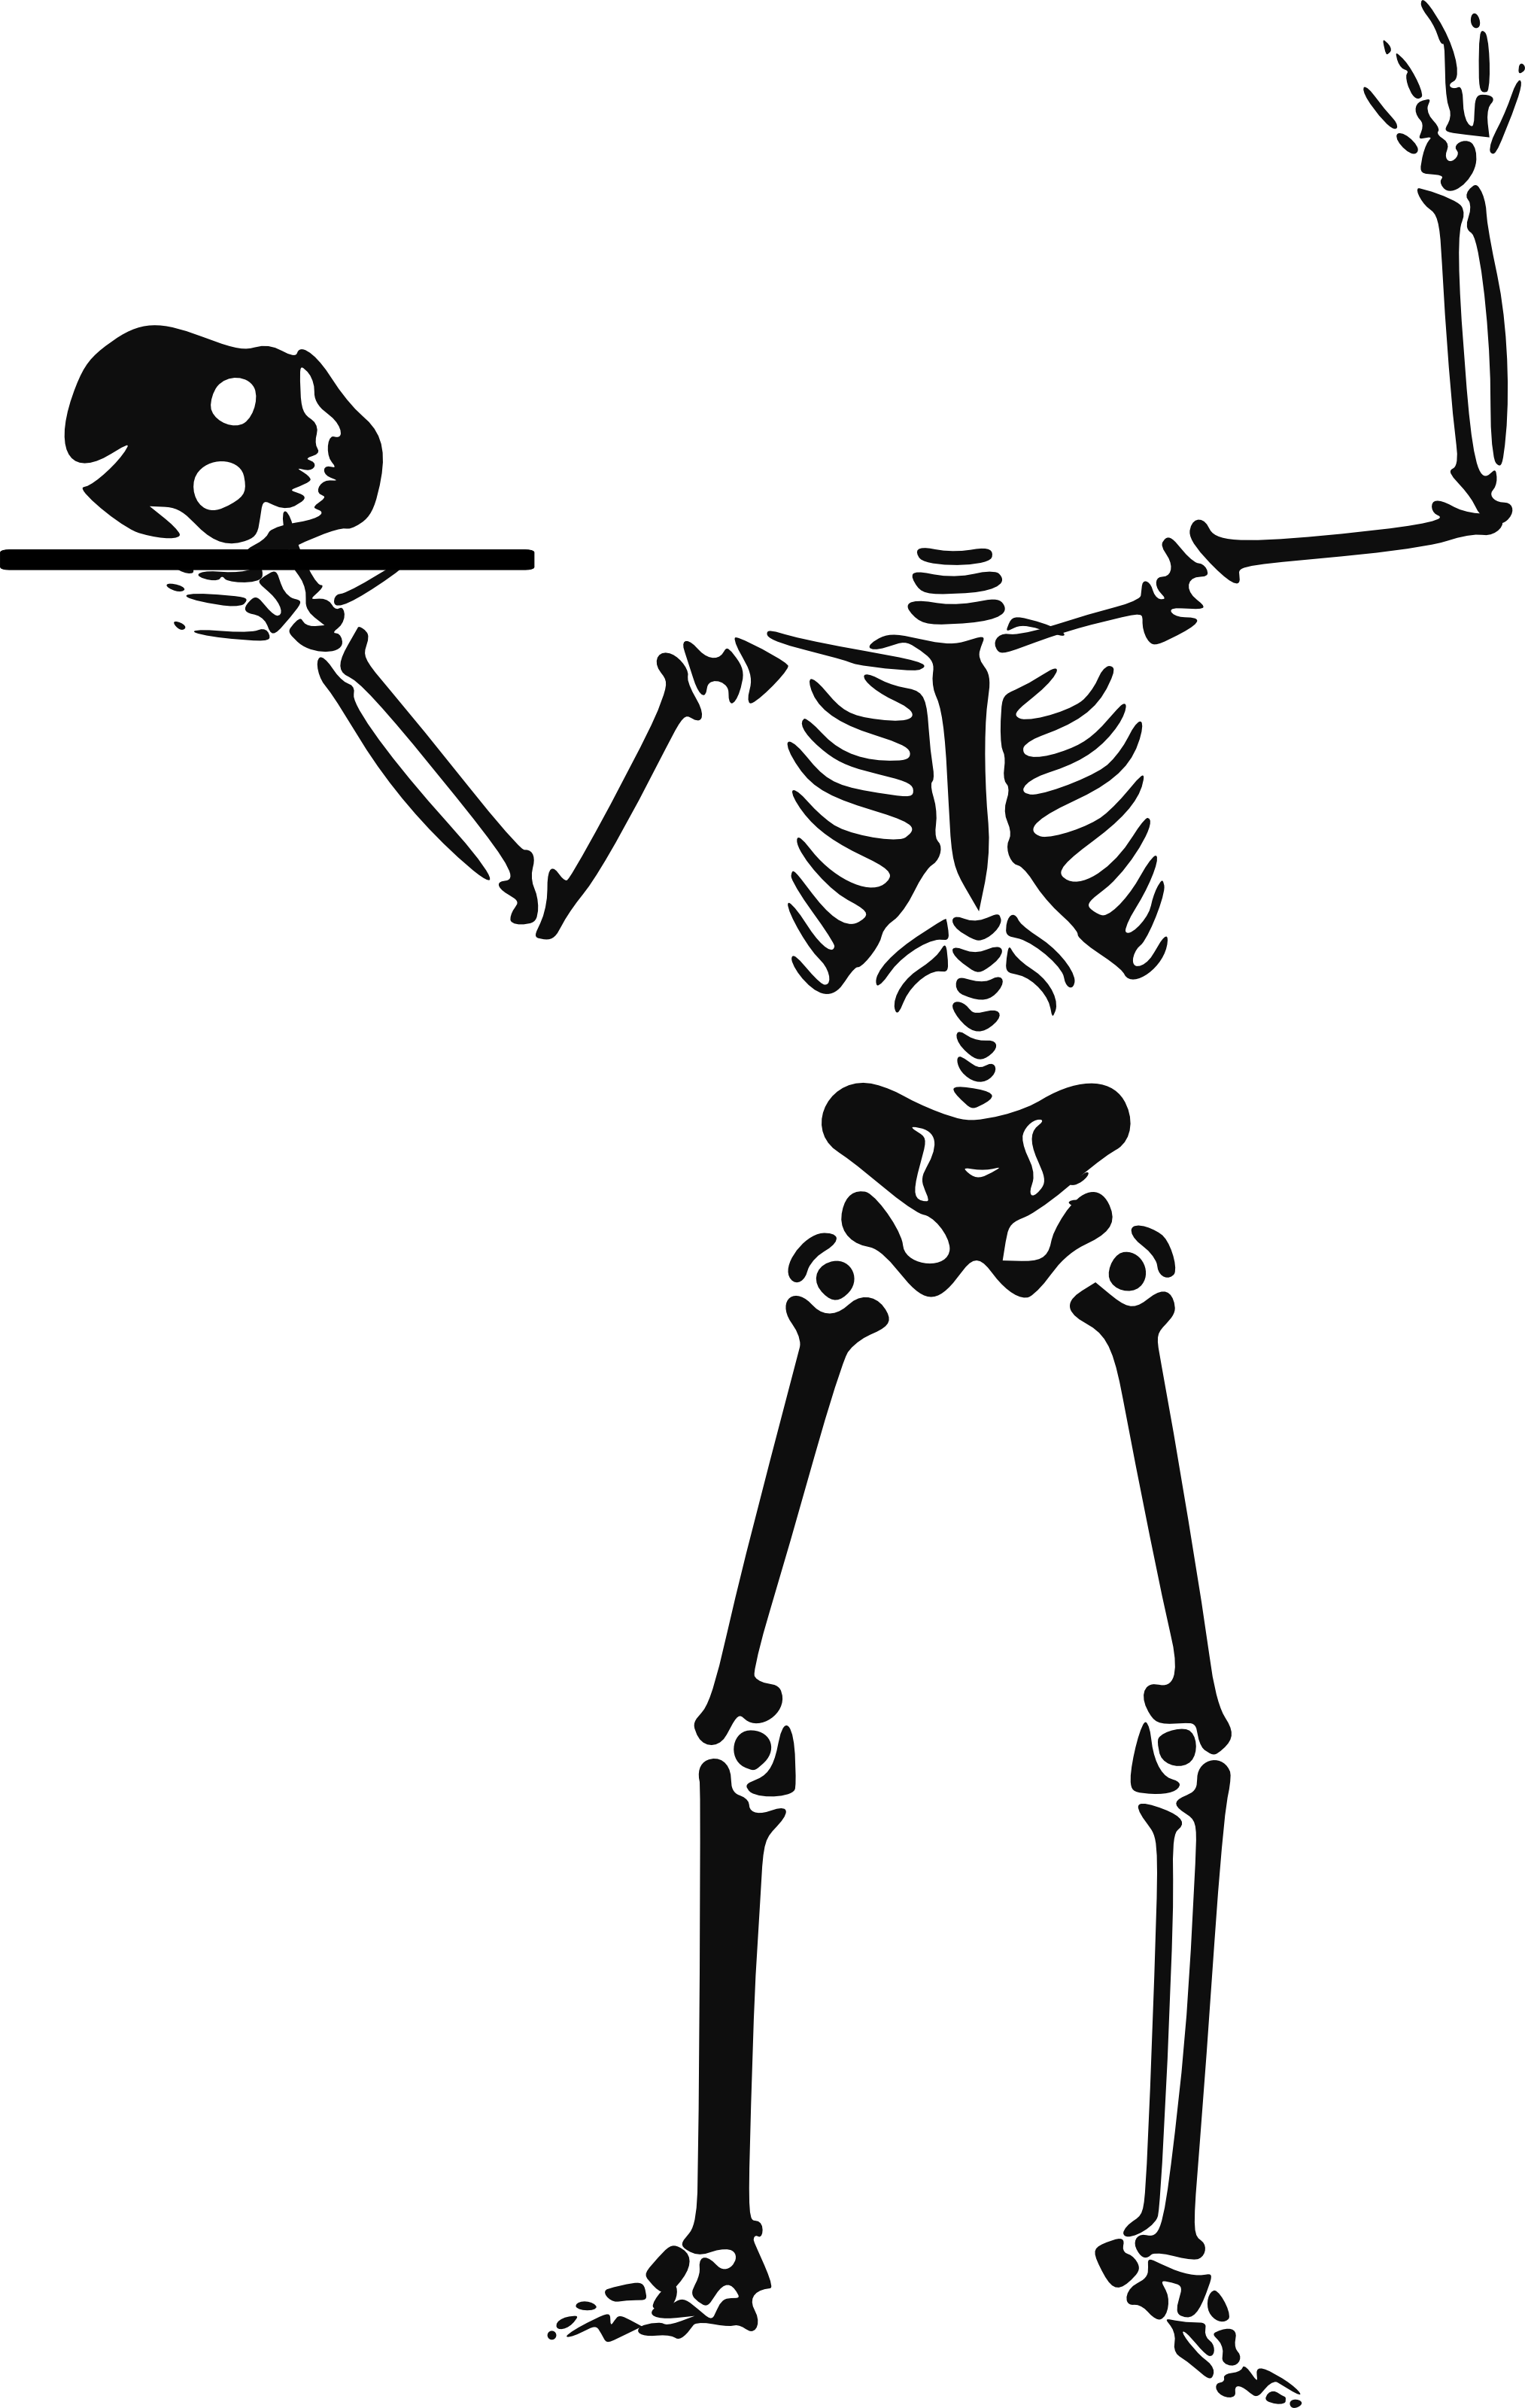 Halloween Skeleton Clipart | Clipart Panda - Free Clipart Images